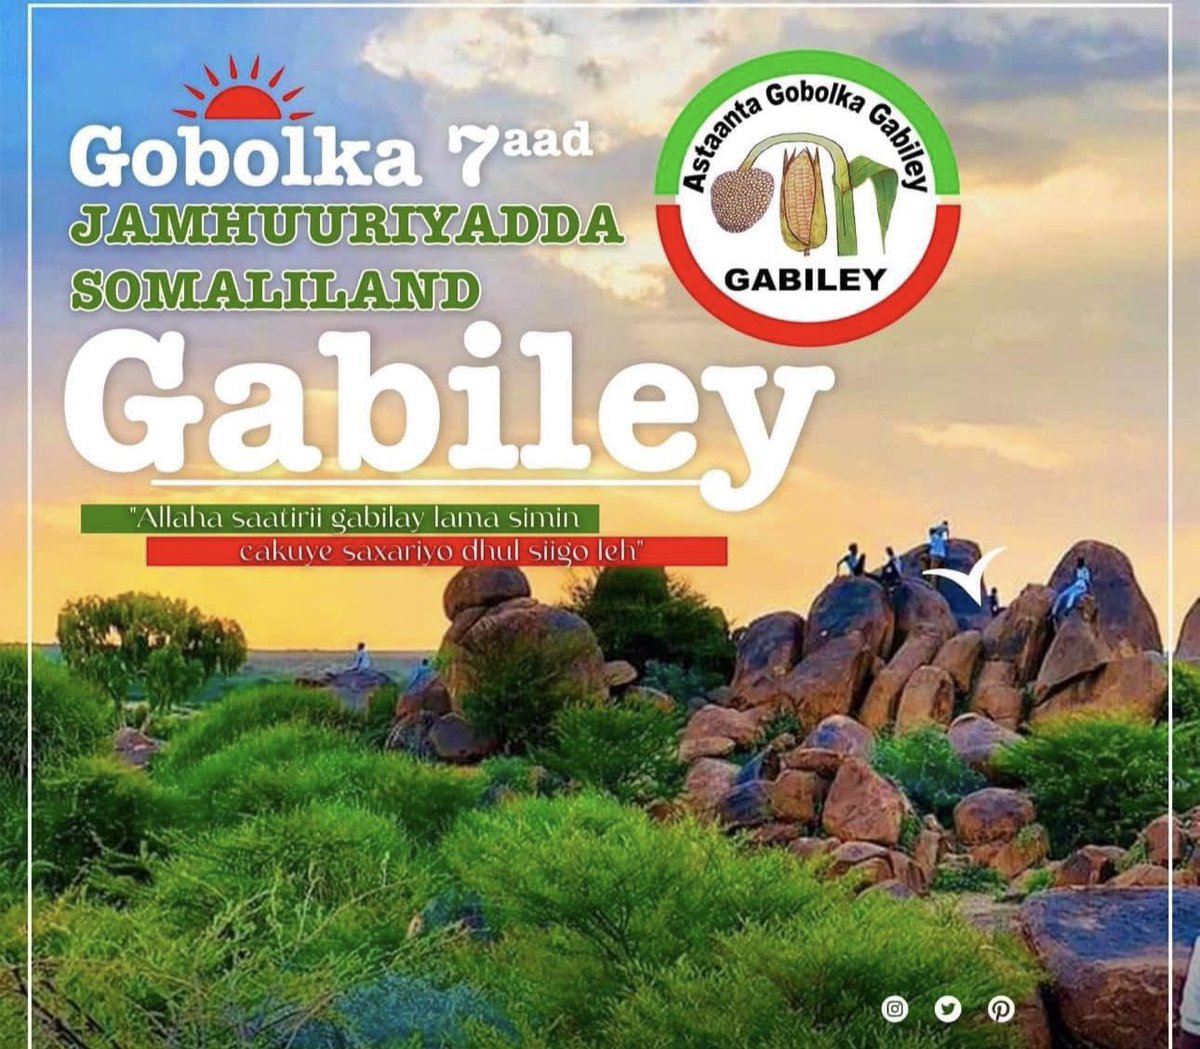 Official - The cabinet ministerial meeting chaired by the President of the Republic of Somaliland @musebiihi have just passed the suggestion from the Ministry of Interior that Gabiley become a new region of Somaliland, also upgraded four districts into grade B (Baki, Caynabo,